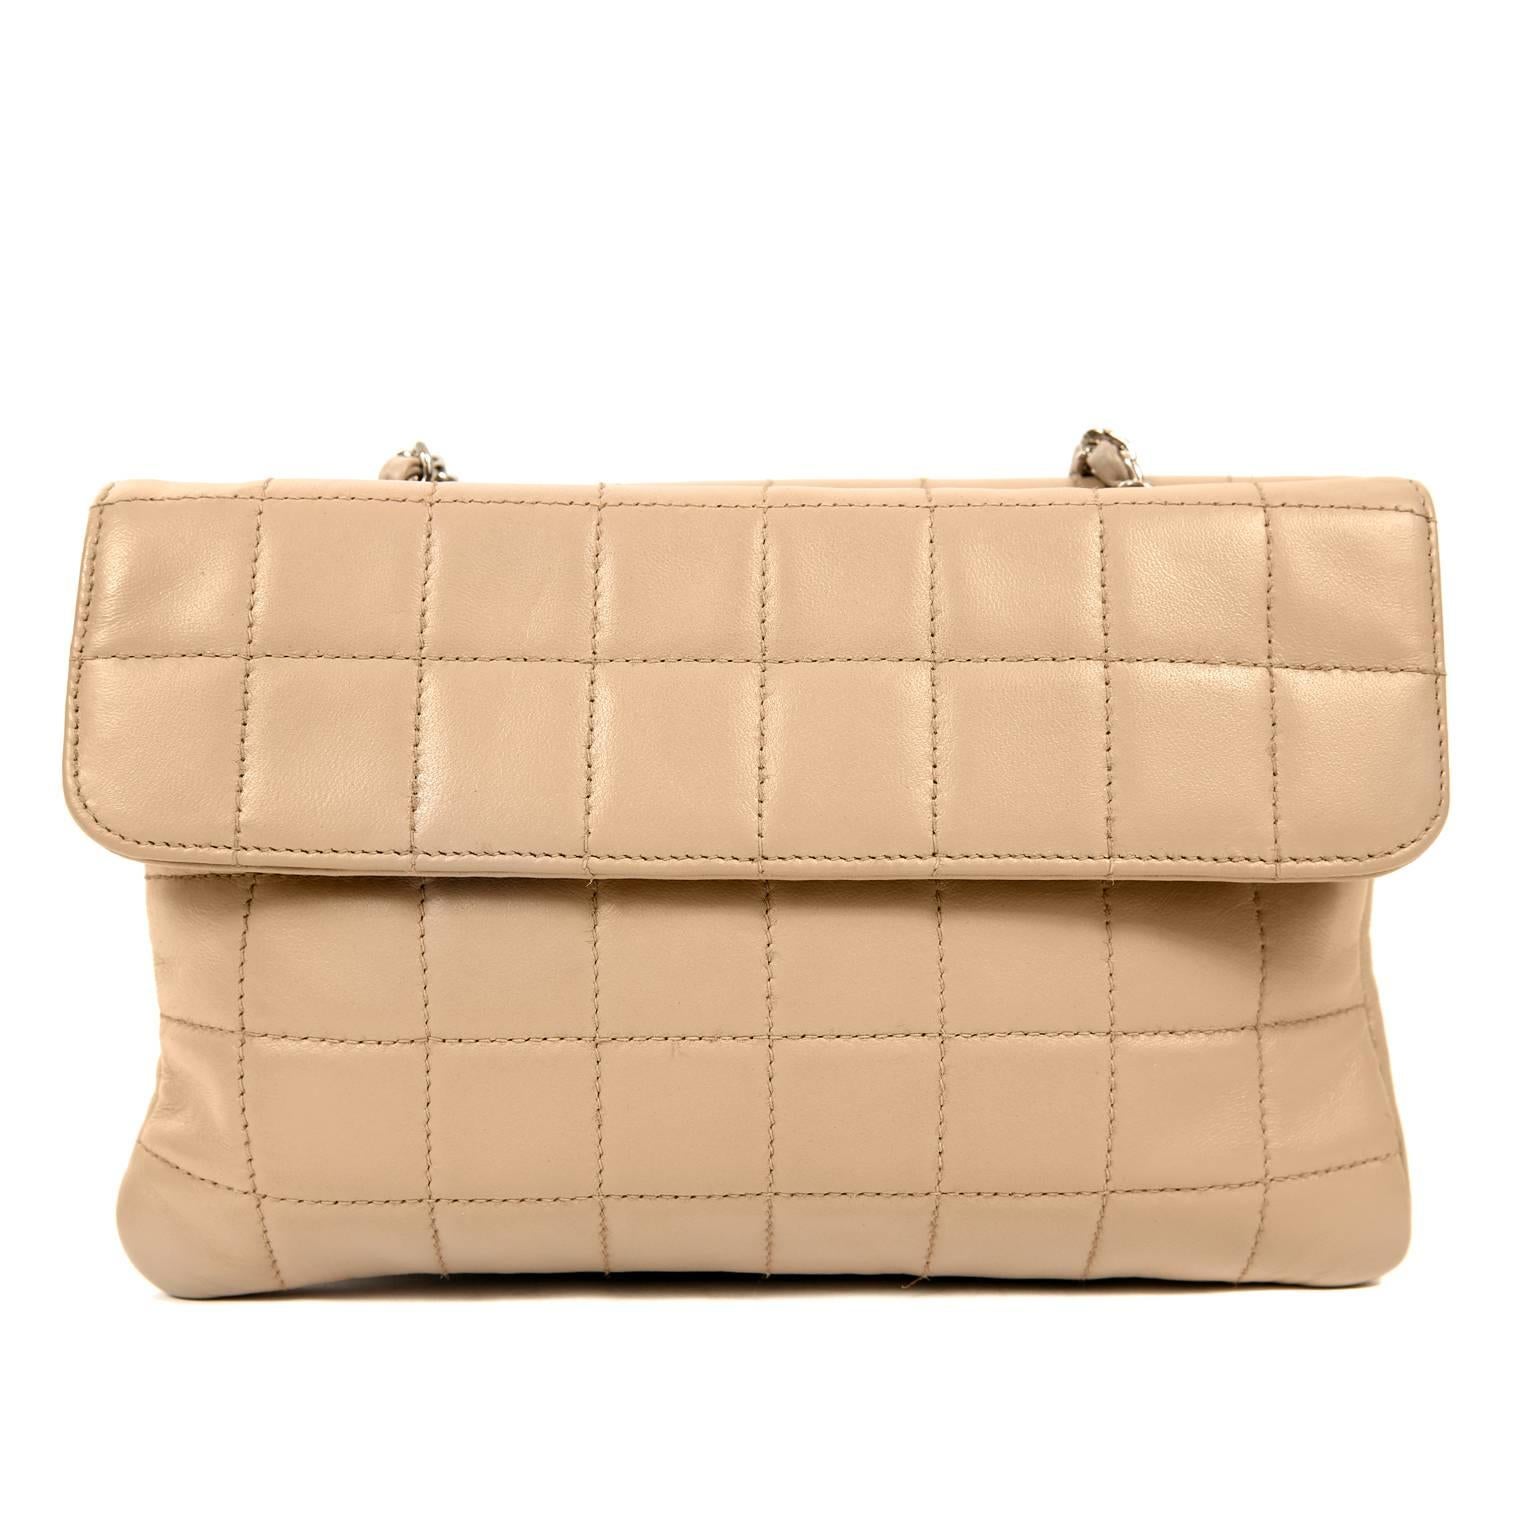 This authentic Chanel Beige Lambskin Double Sided Crossbody Bag is in better than excellent condition.  Quite roomy, this well-designed bag can carry all the necessary items for a day or night on the town.  
Beige lambskin is square quilted in